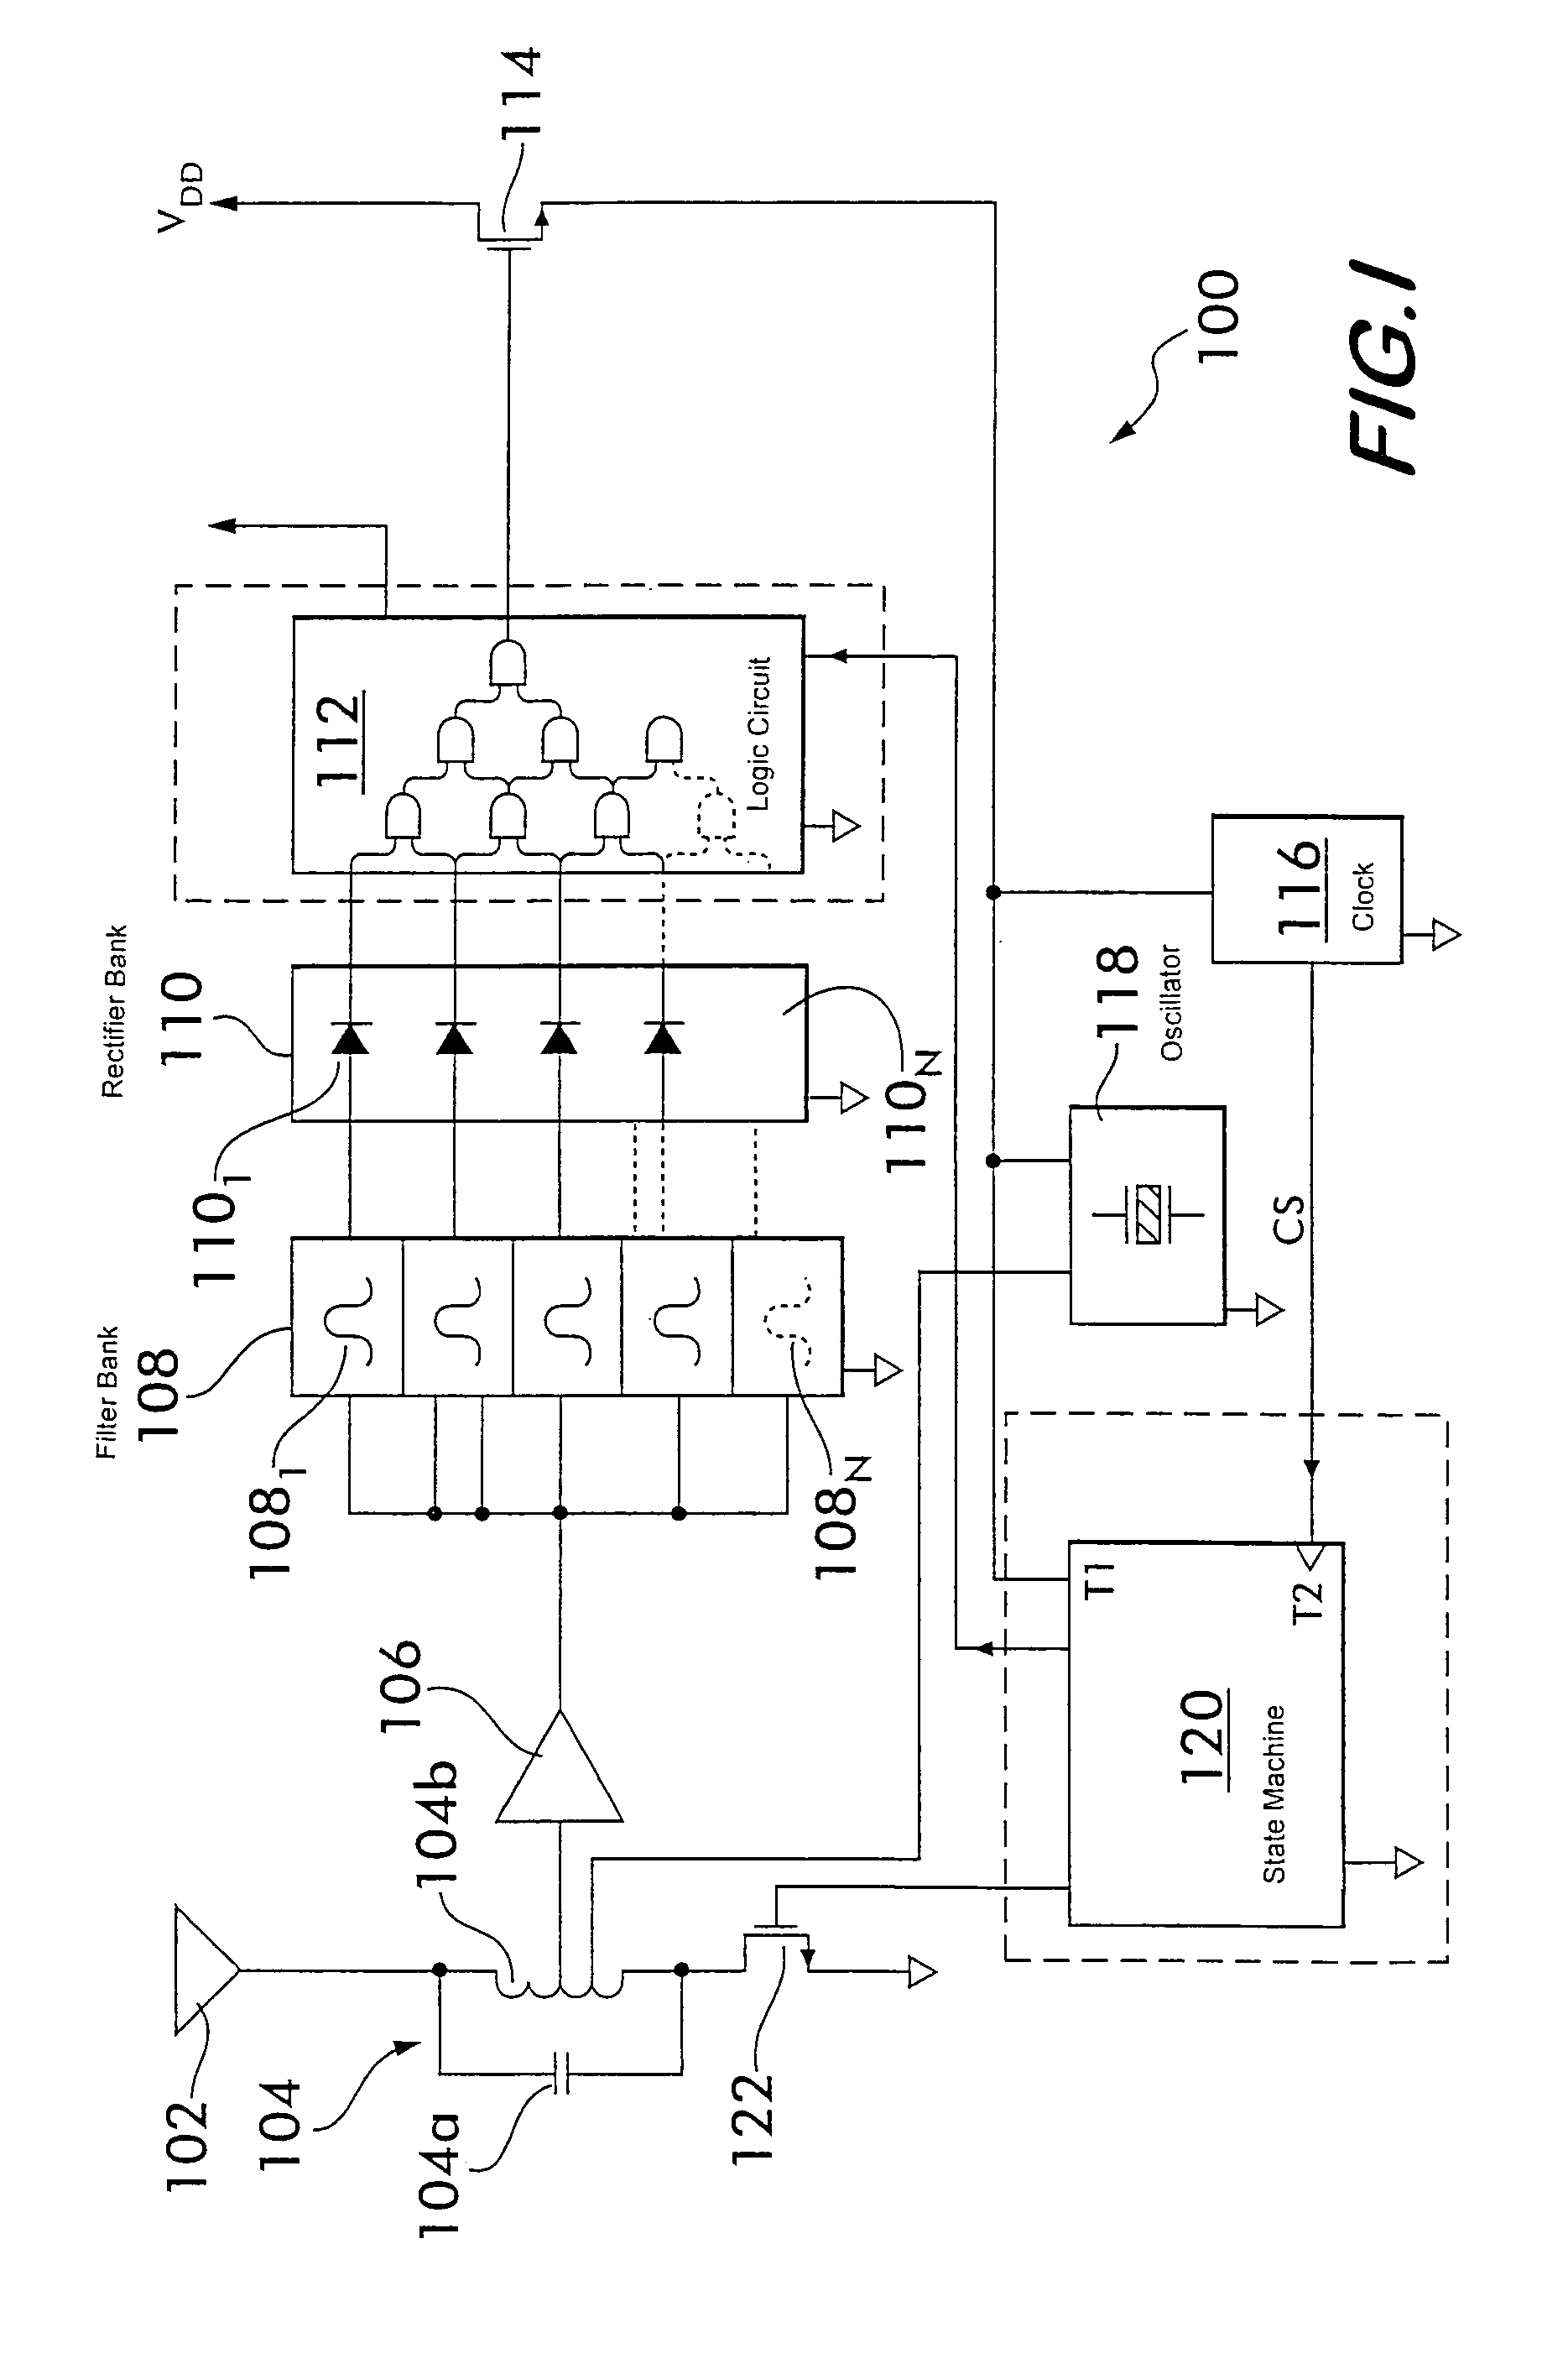 Continuous wave (CW)-fixed multiple frequency triggered, radio frequency identification (RFID) tag and system and method employing same